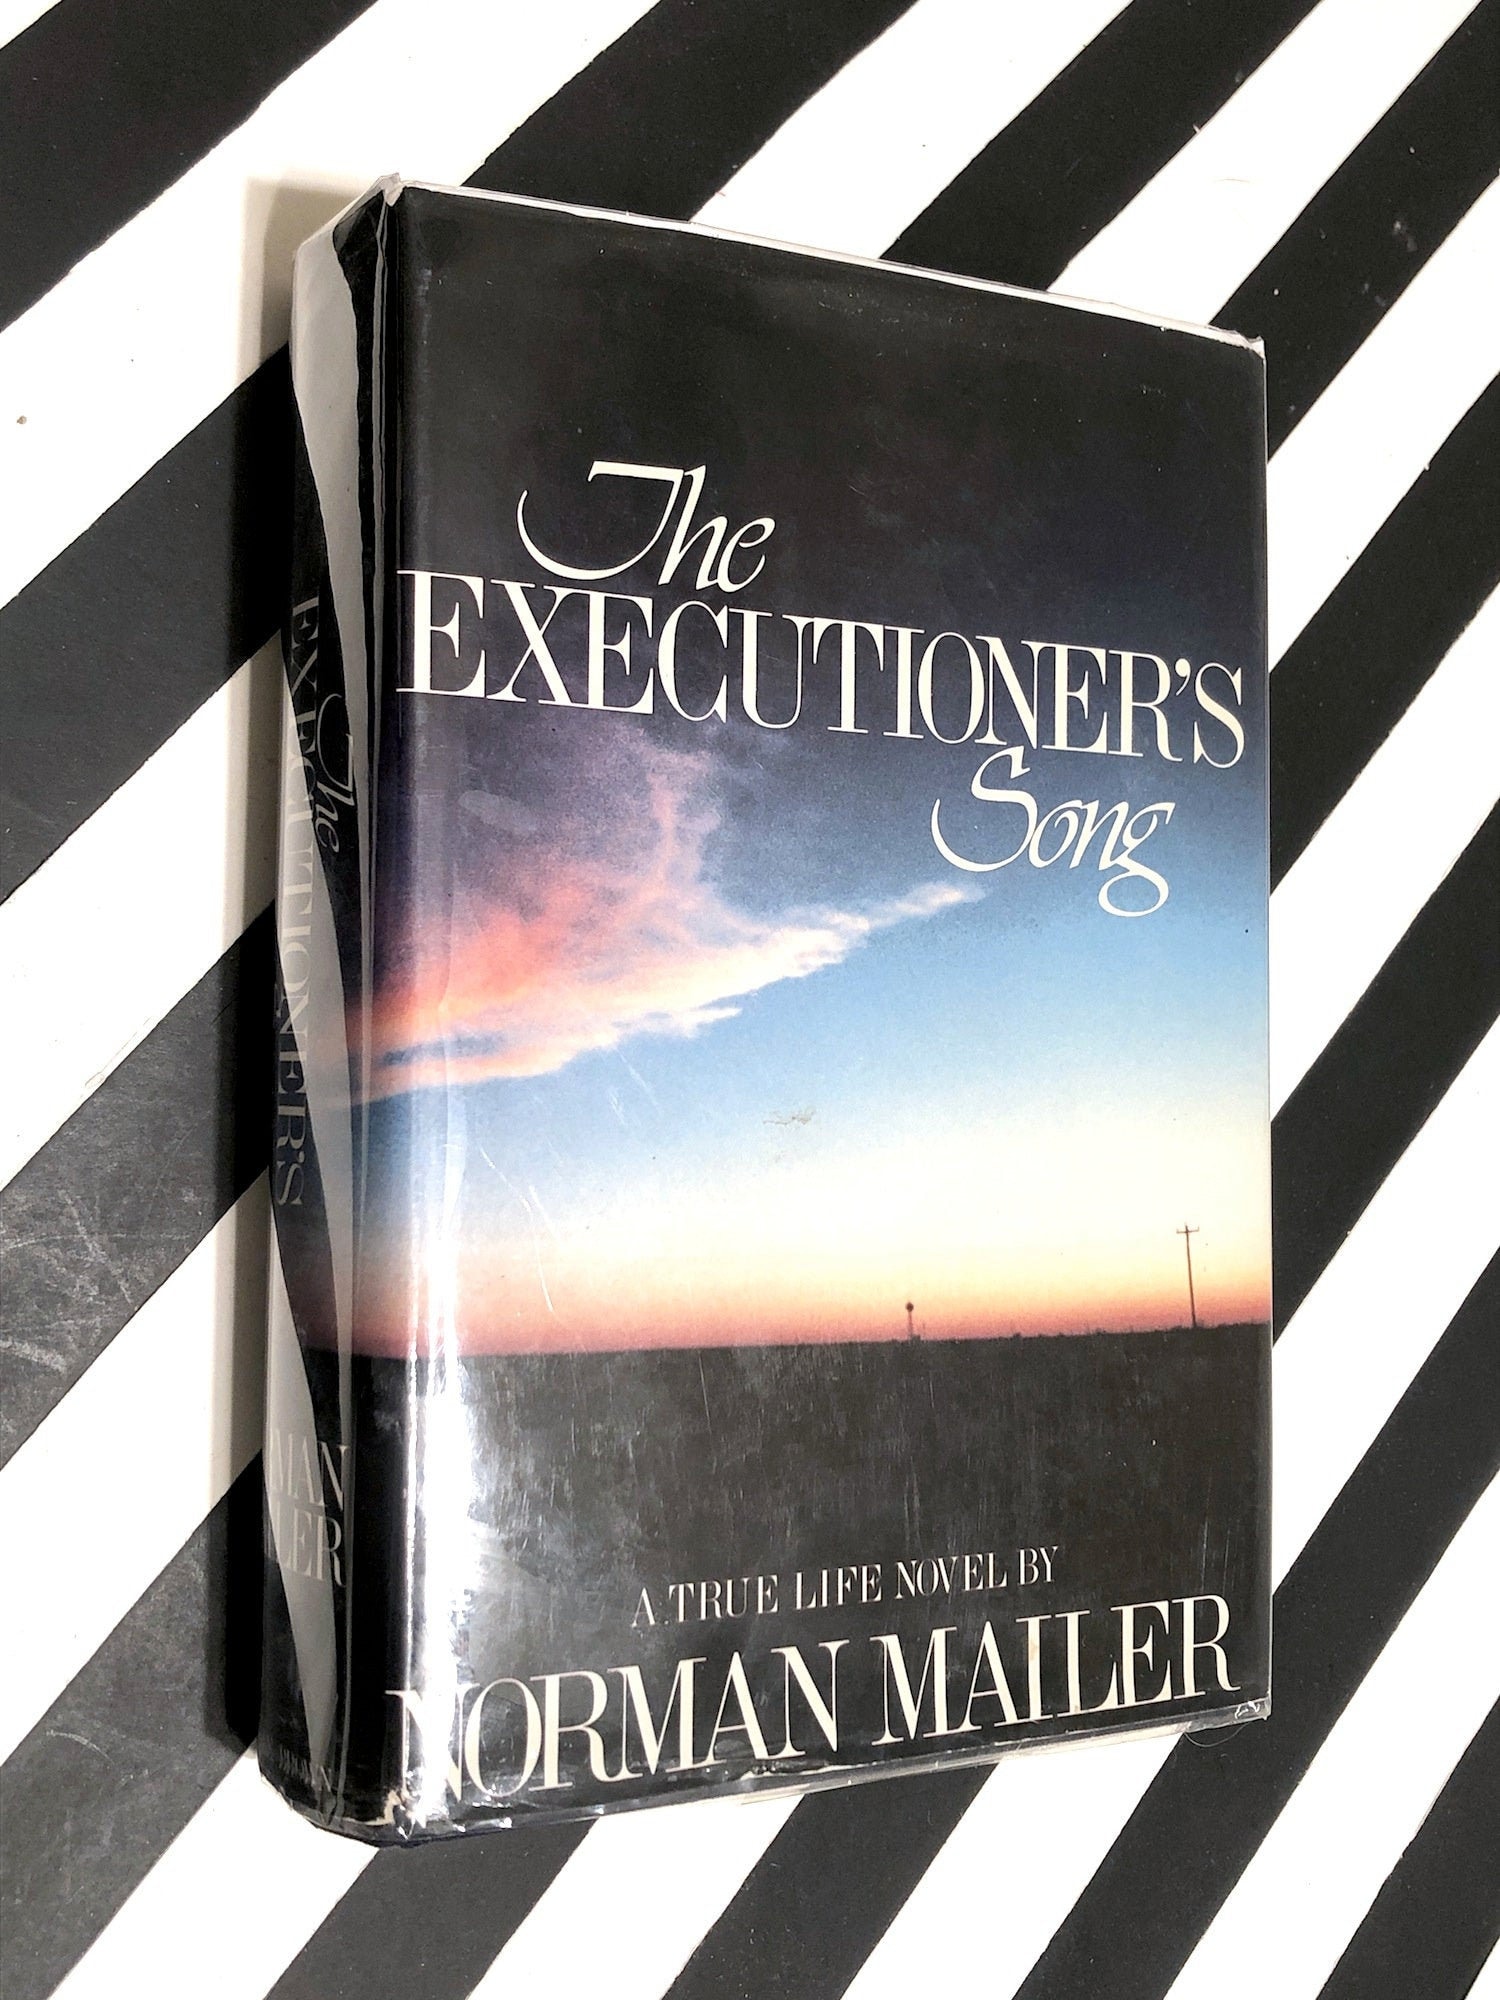 The Executioners Song by Norman Mailer 1979 First image